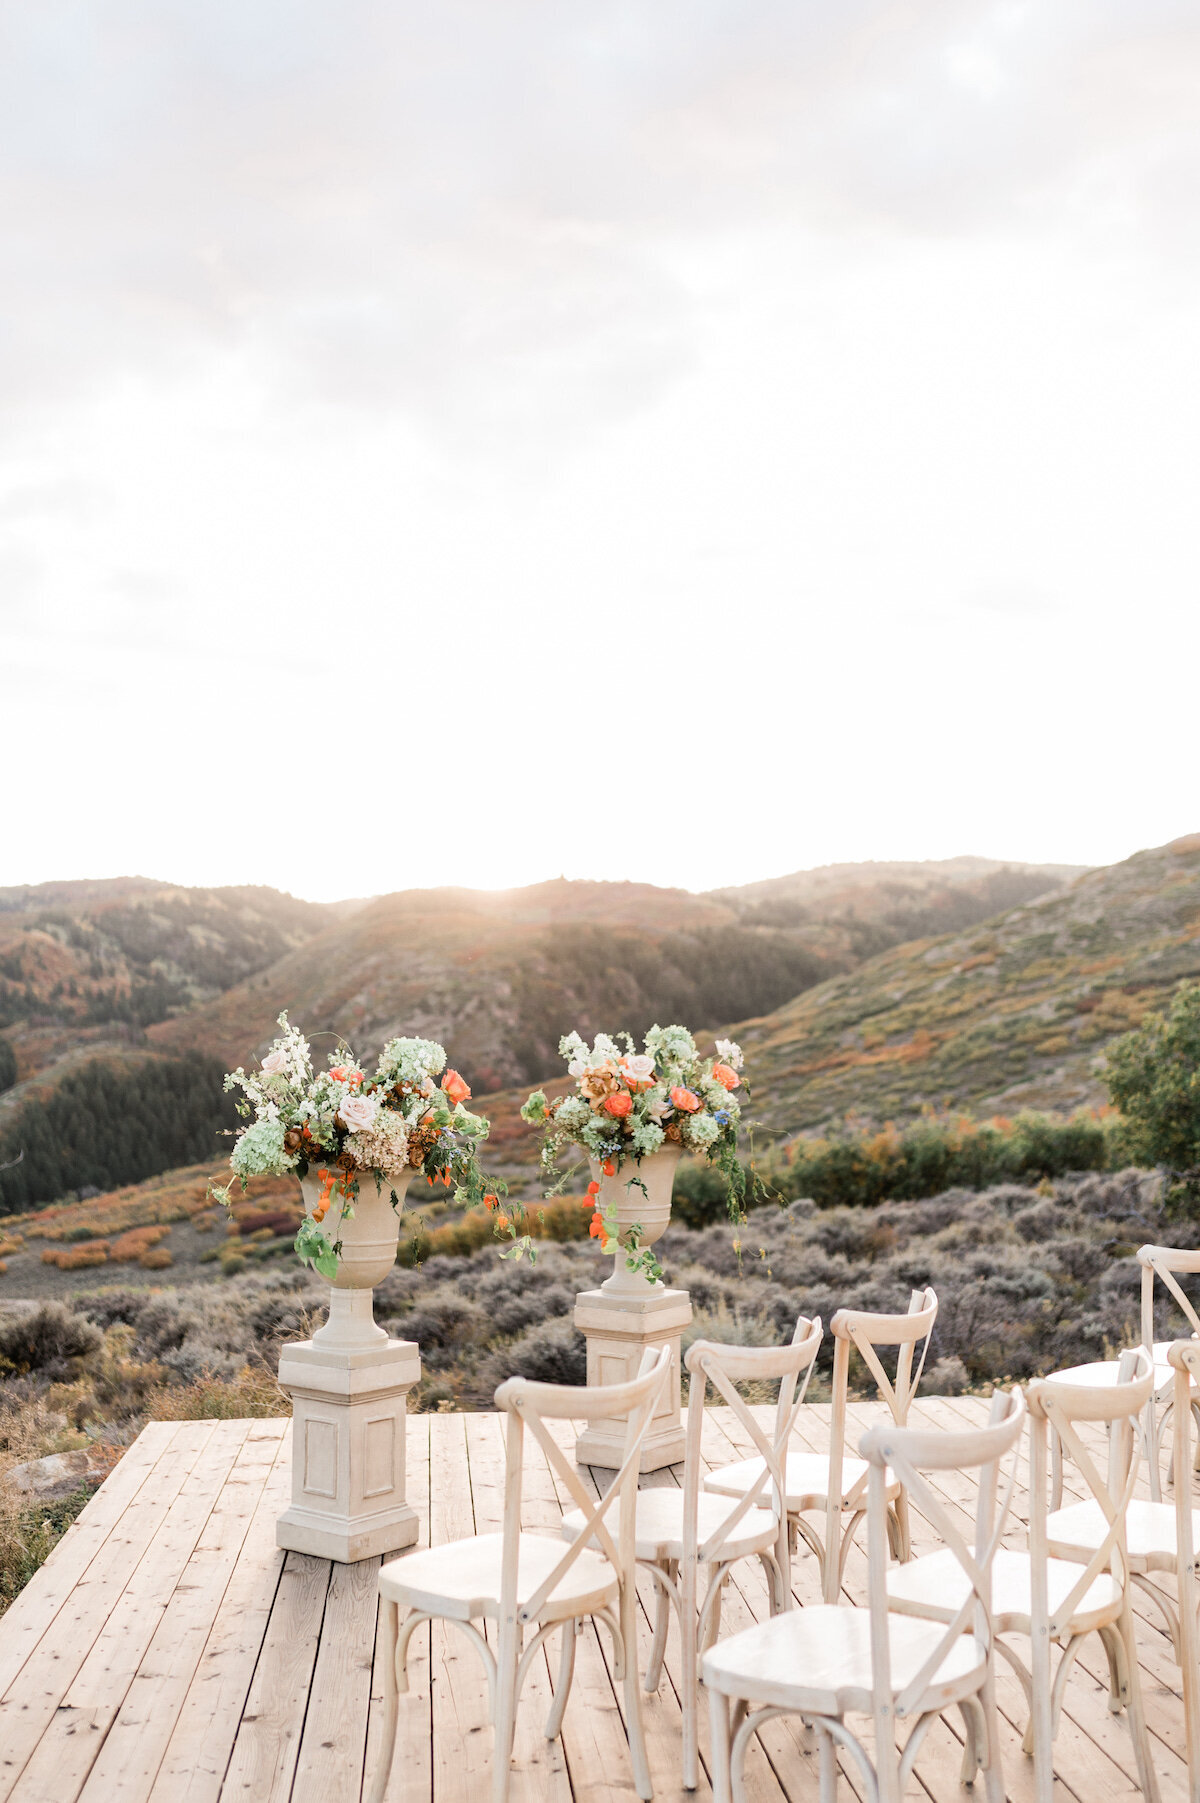 Cherish the intimate moments of your elopement with our fine art lens. Amidst the beauty of Park City, Utah, we capture the delicate details and emotions that define your connection.